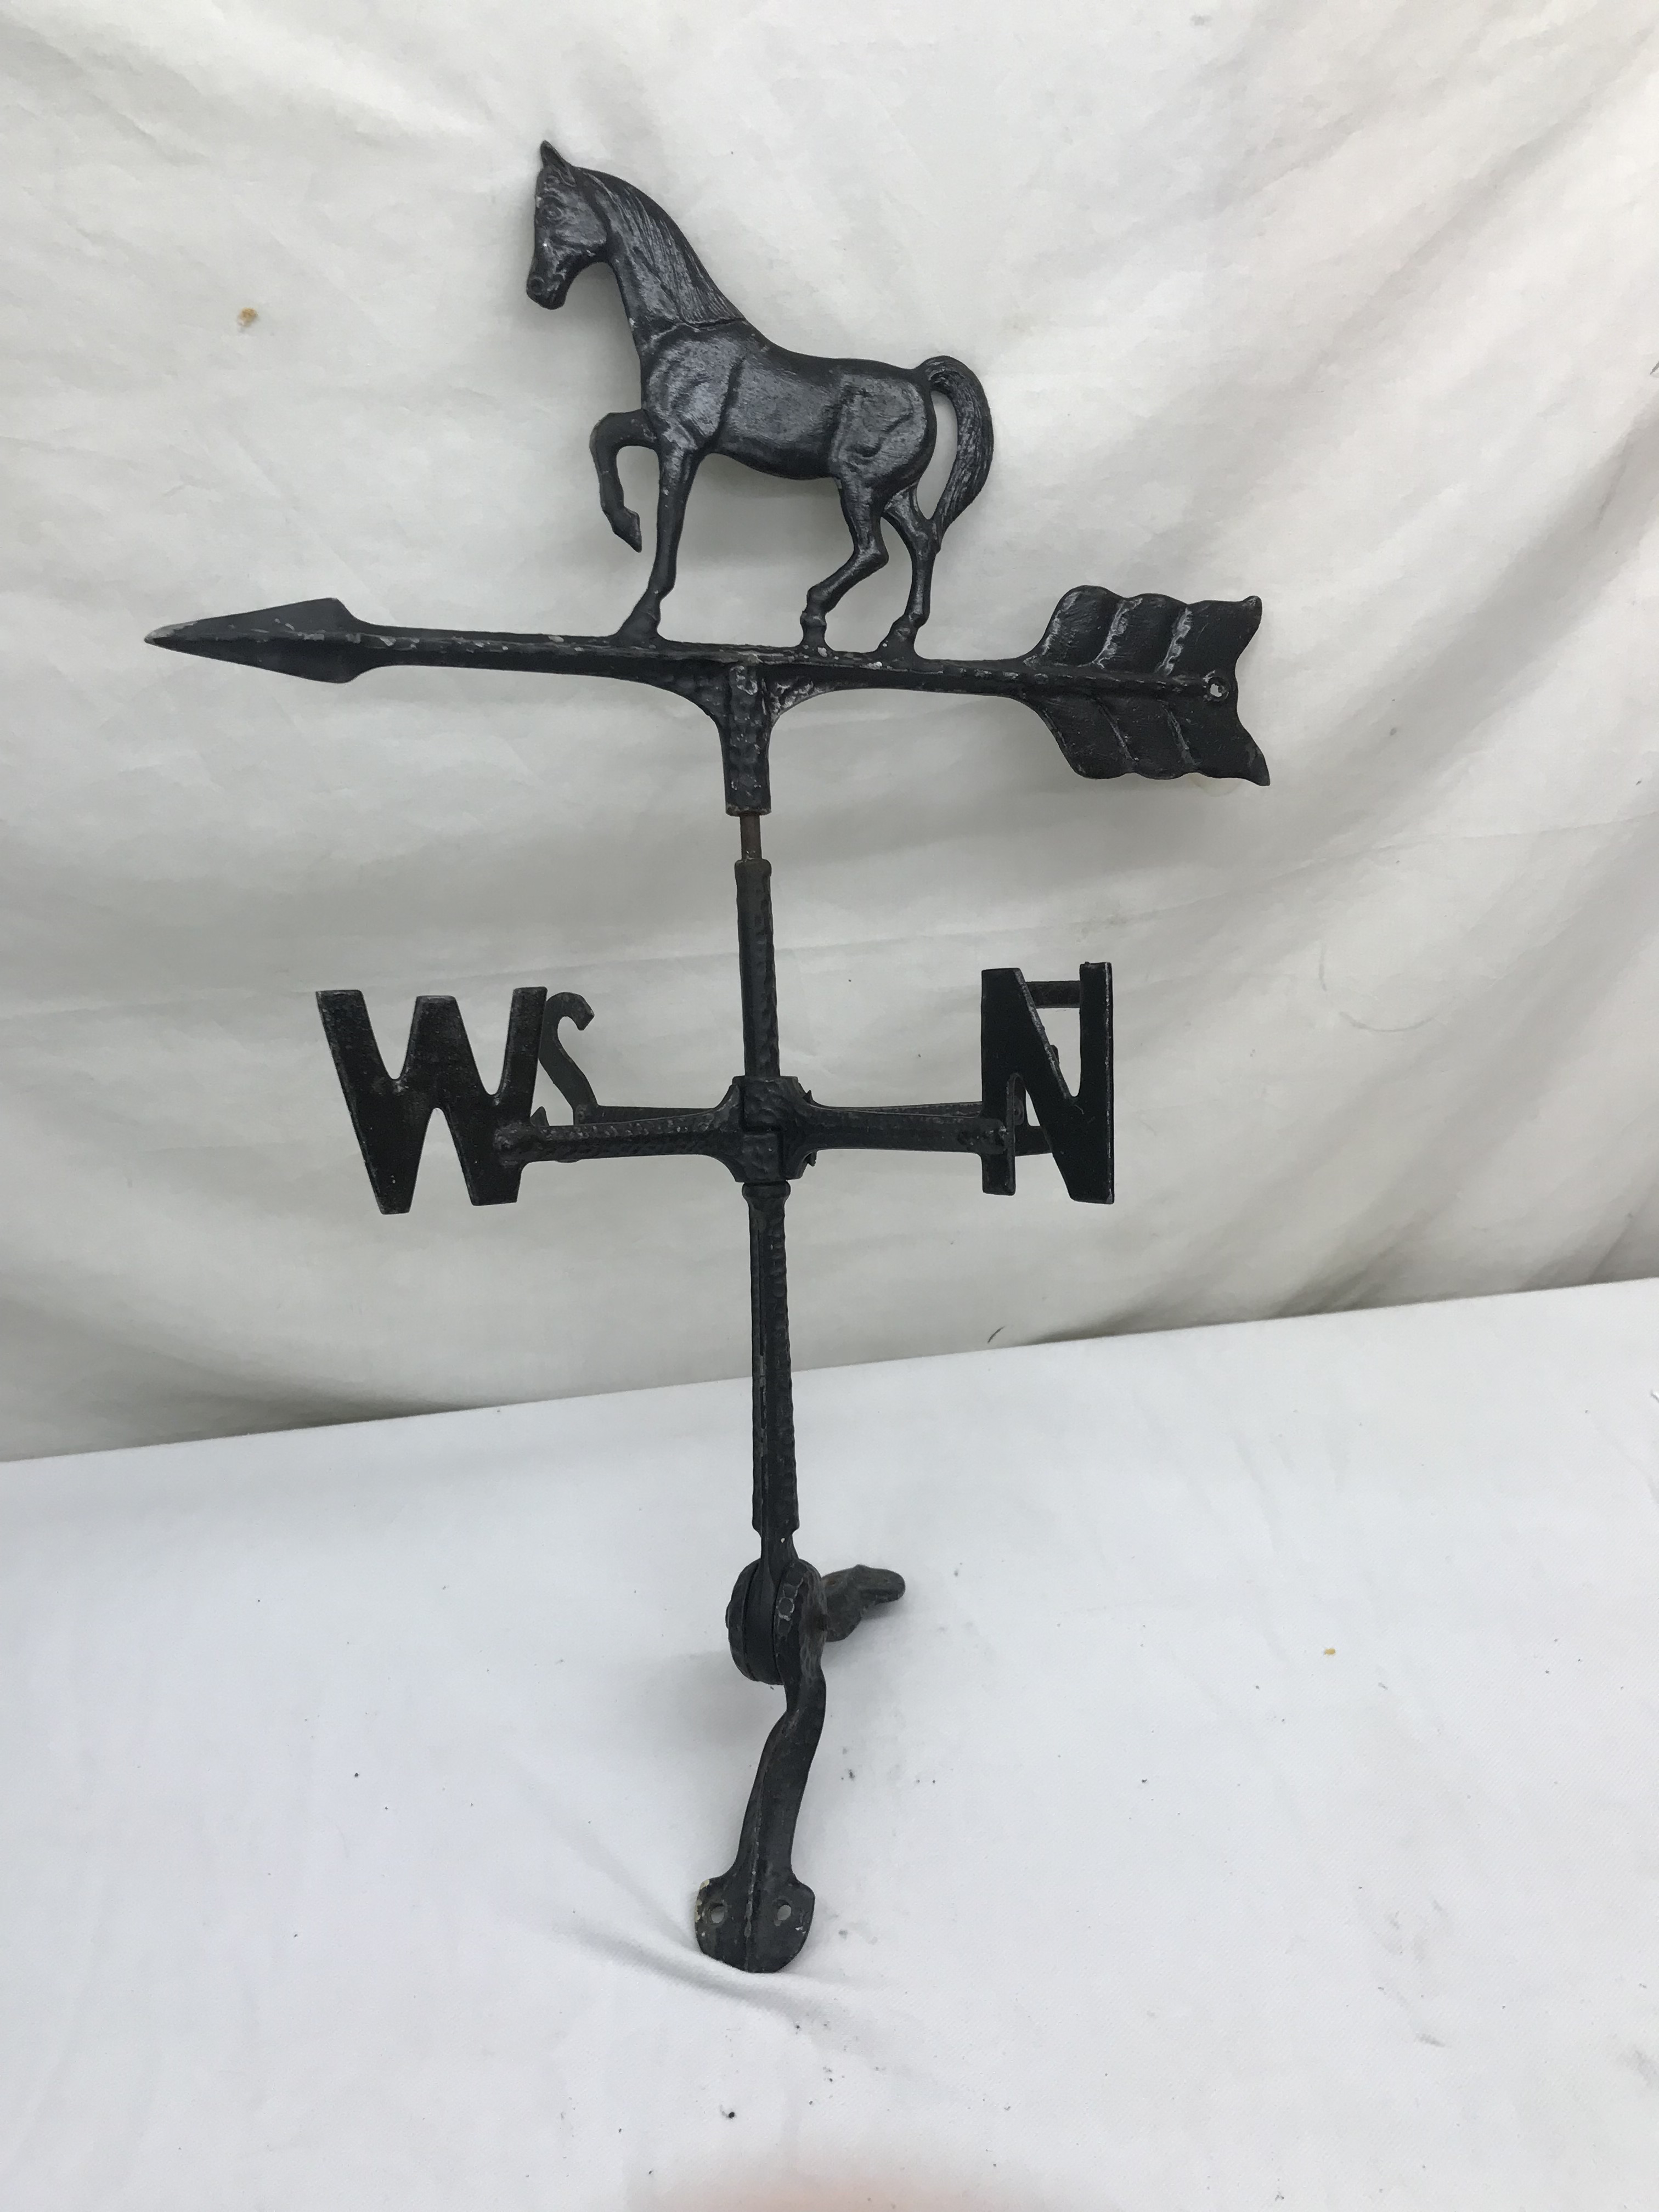 A meta weather vane in the form of a horse